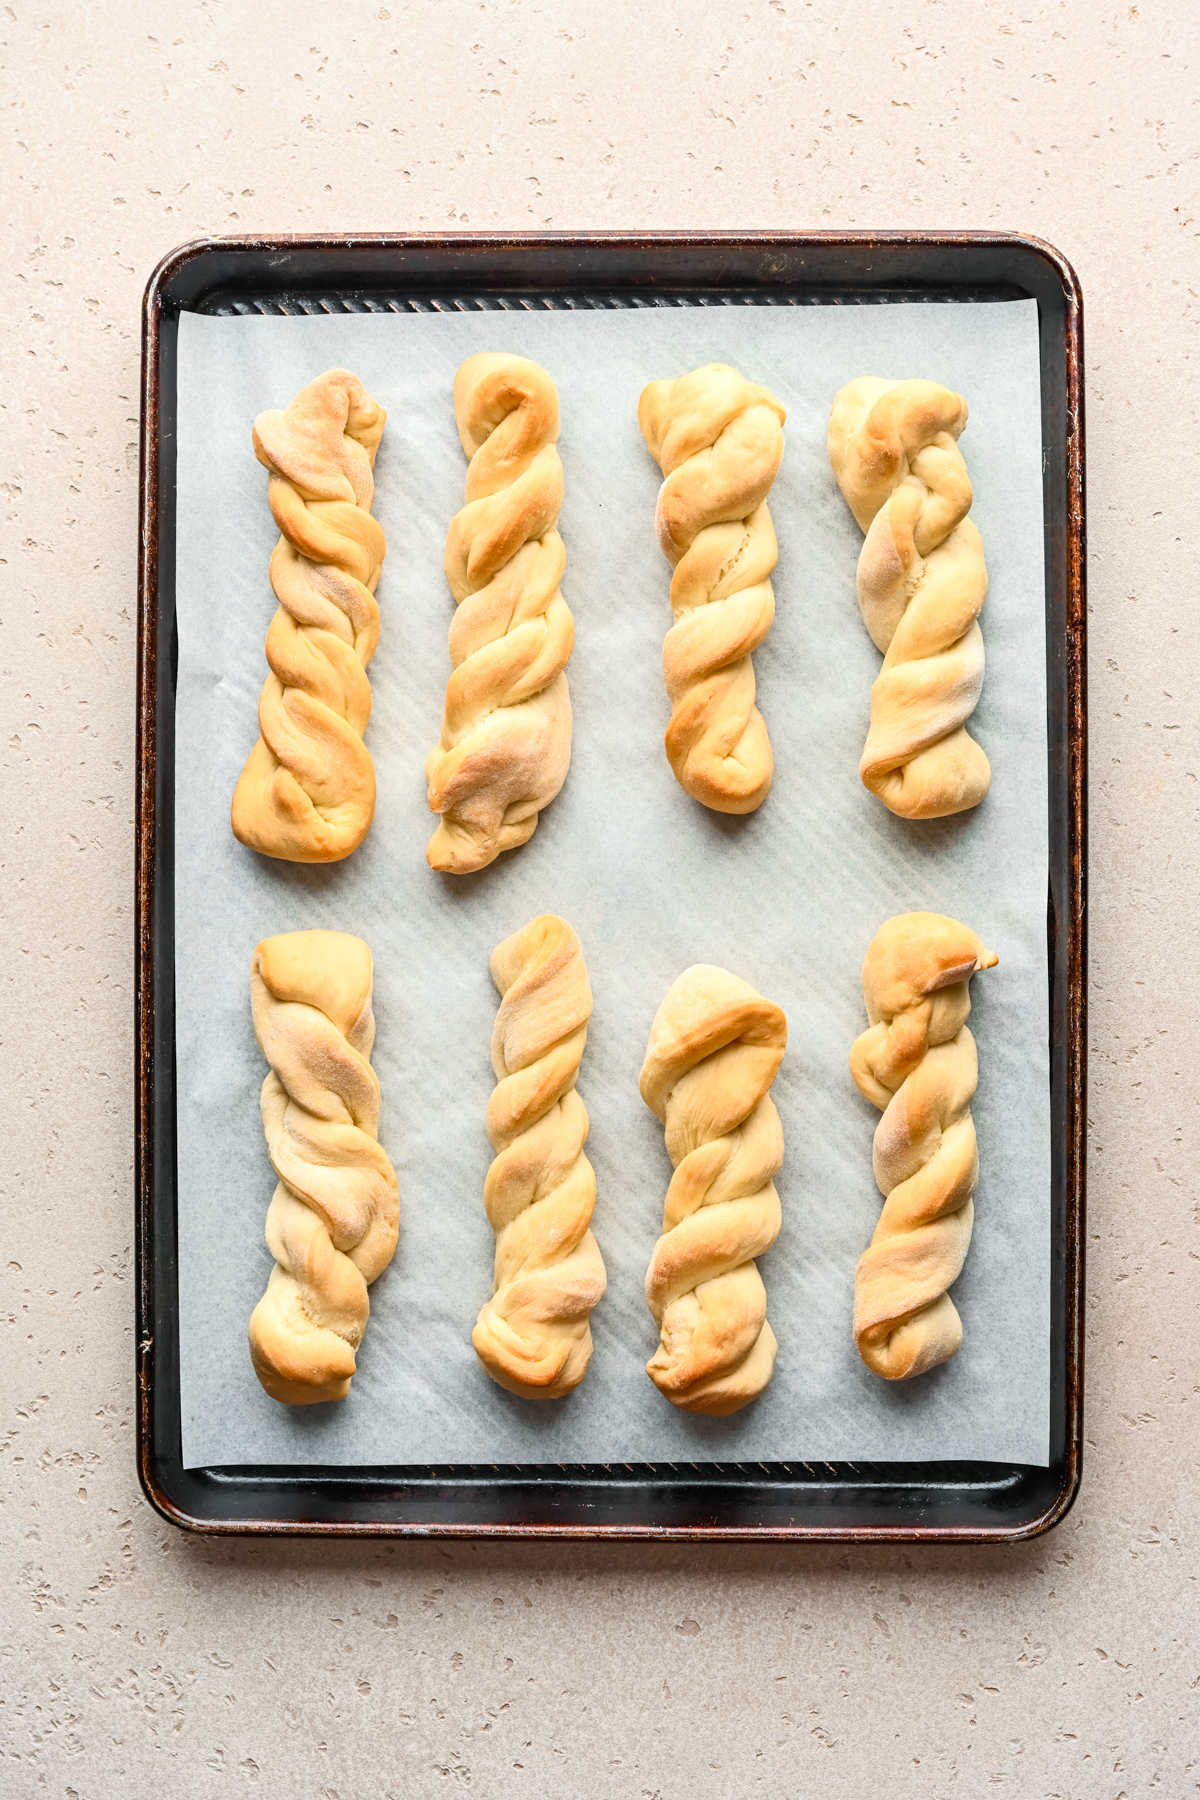 Baked cinnamon breadsticks on a parchment lined baking sheet.